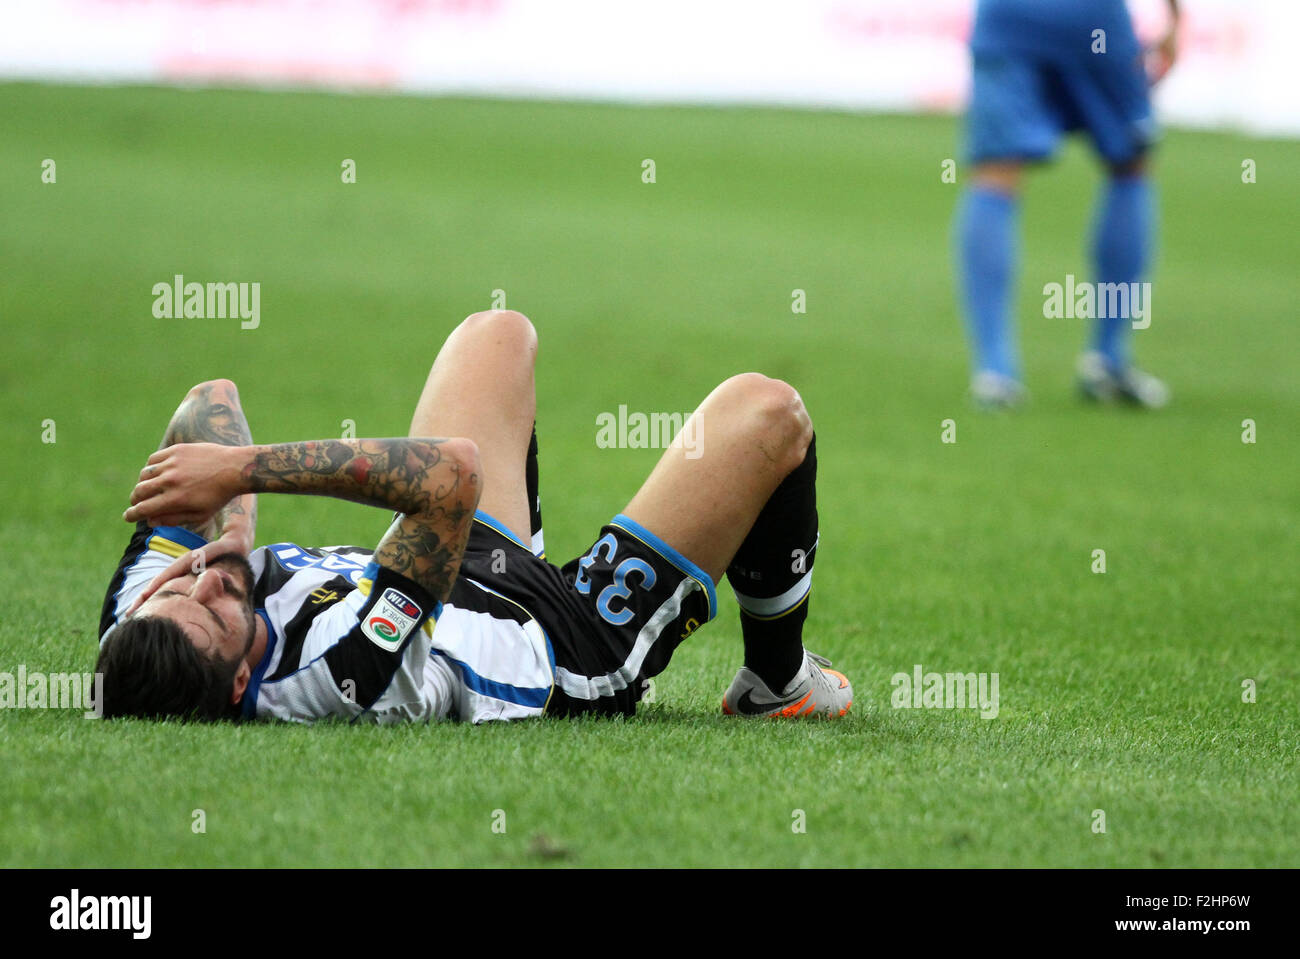 Udine, Italy. 19th September, 2015. Udinese's midfielder Panagiotis Giorgios Kone on field during the Italian Serie A football match between Udinese Calcio v Empoli at Friuli Stadium on 19 September, 2015 in Udine. Credit:  Andrea Spinelli/Alamy Live News Stock Photo